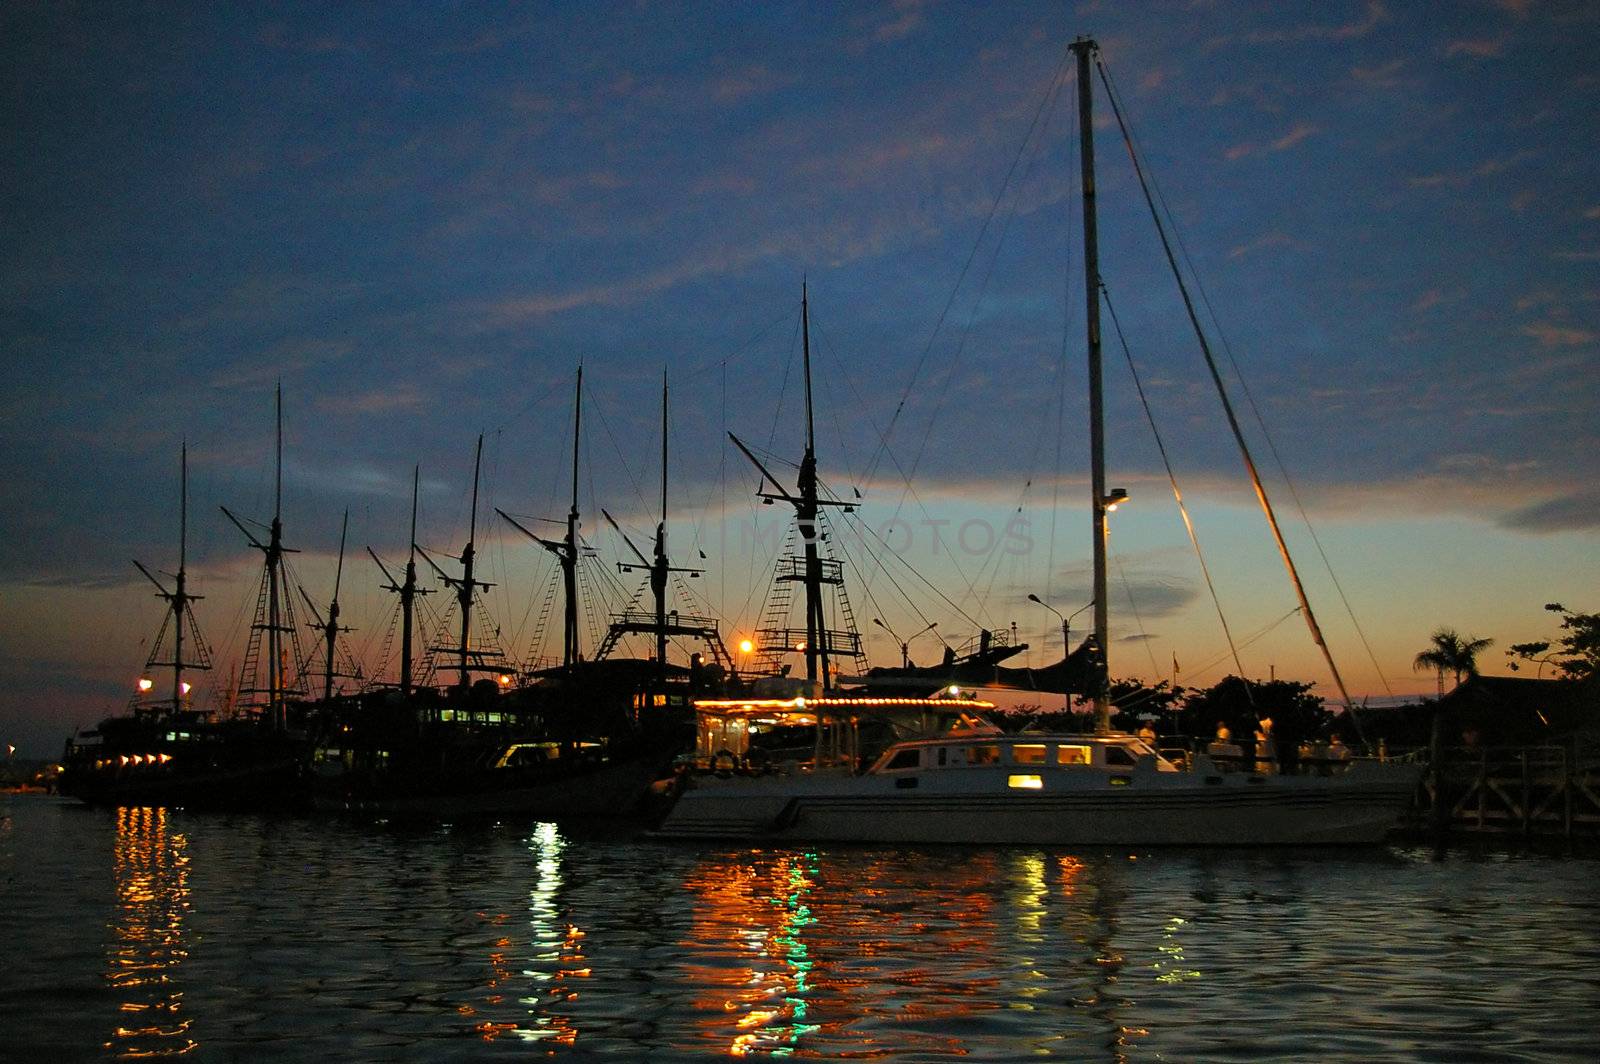 Private yachts anchored at sunset, Benoa harbour, Bali, Indonesia.